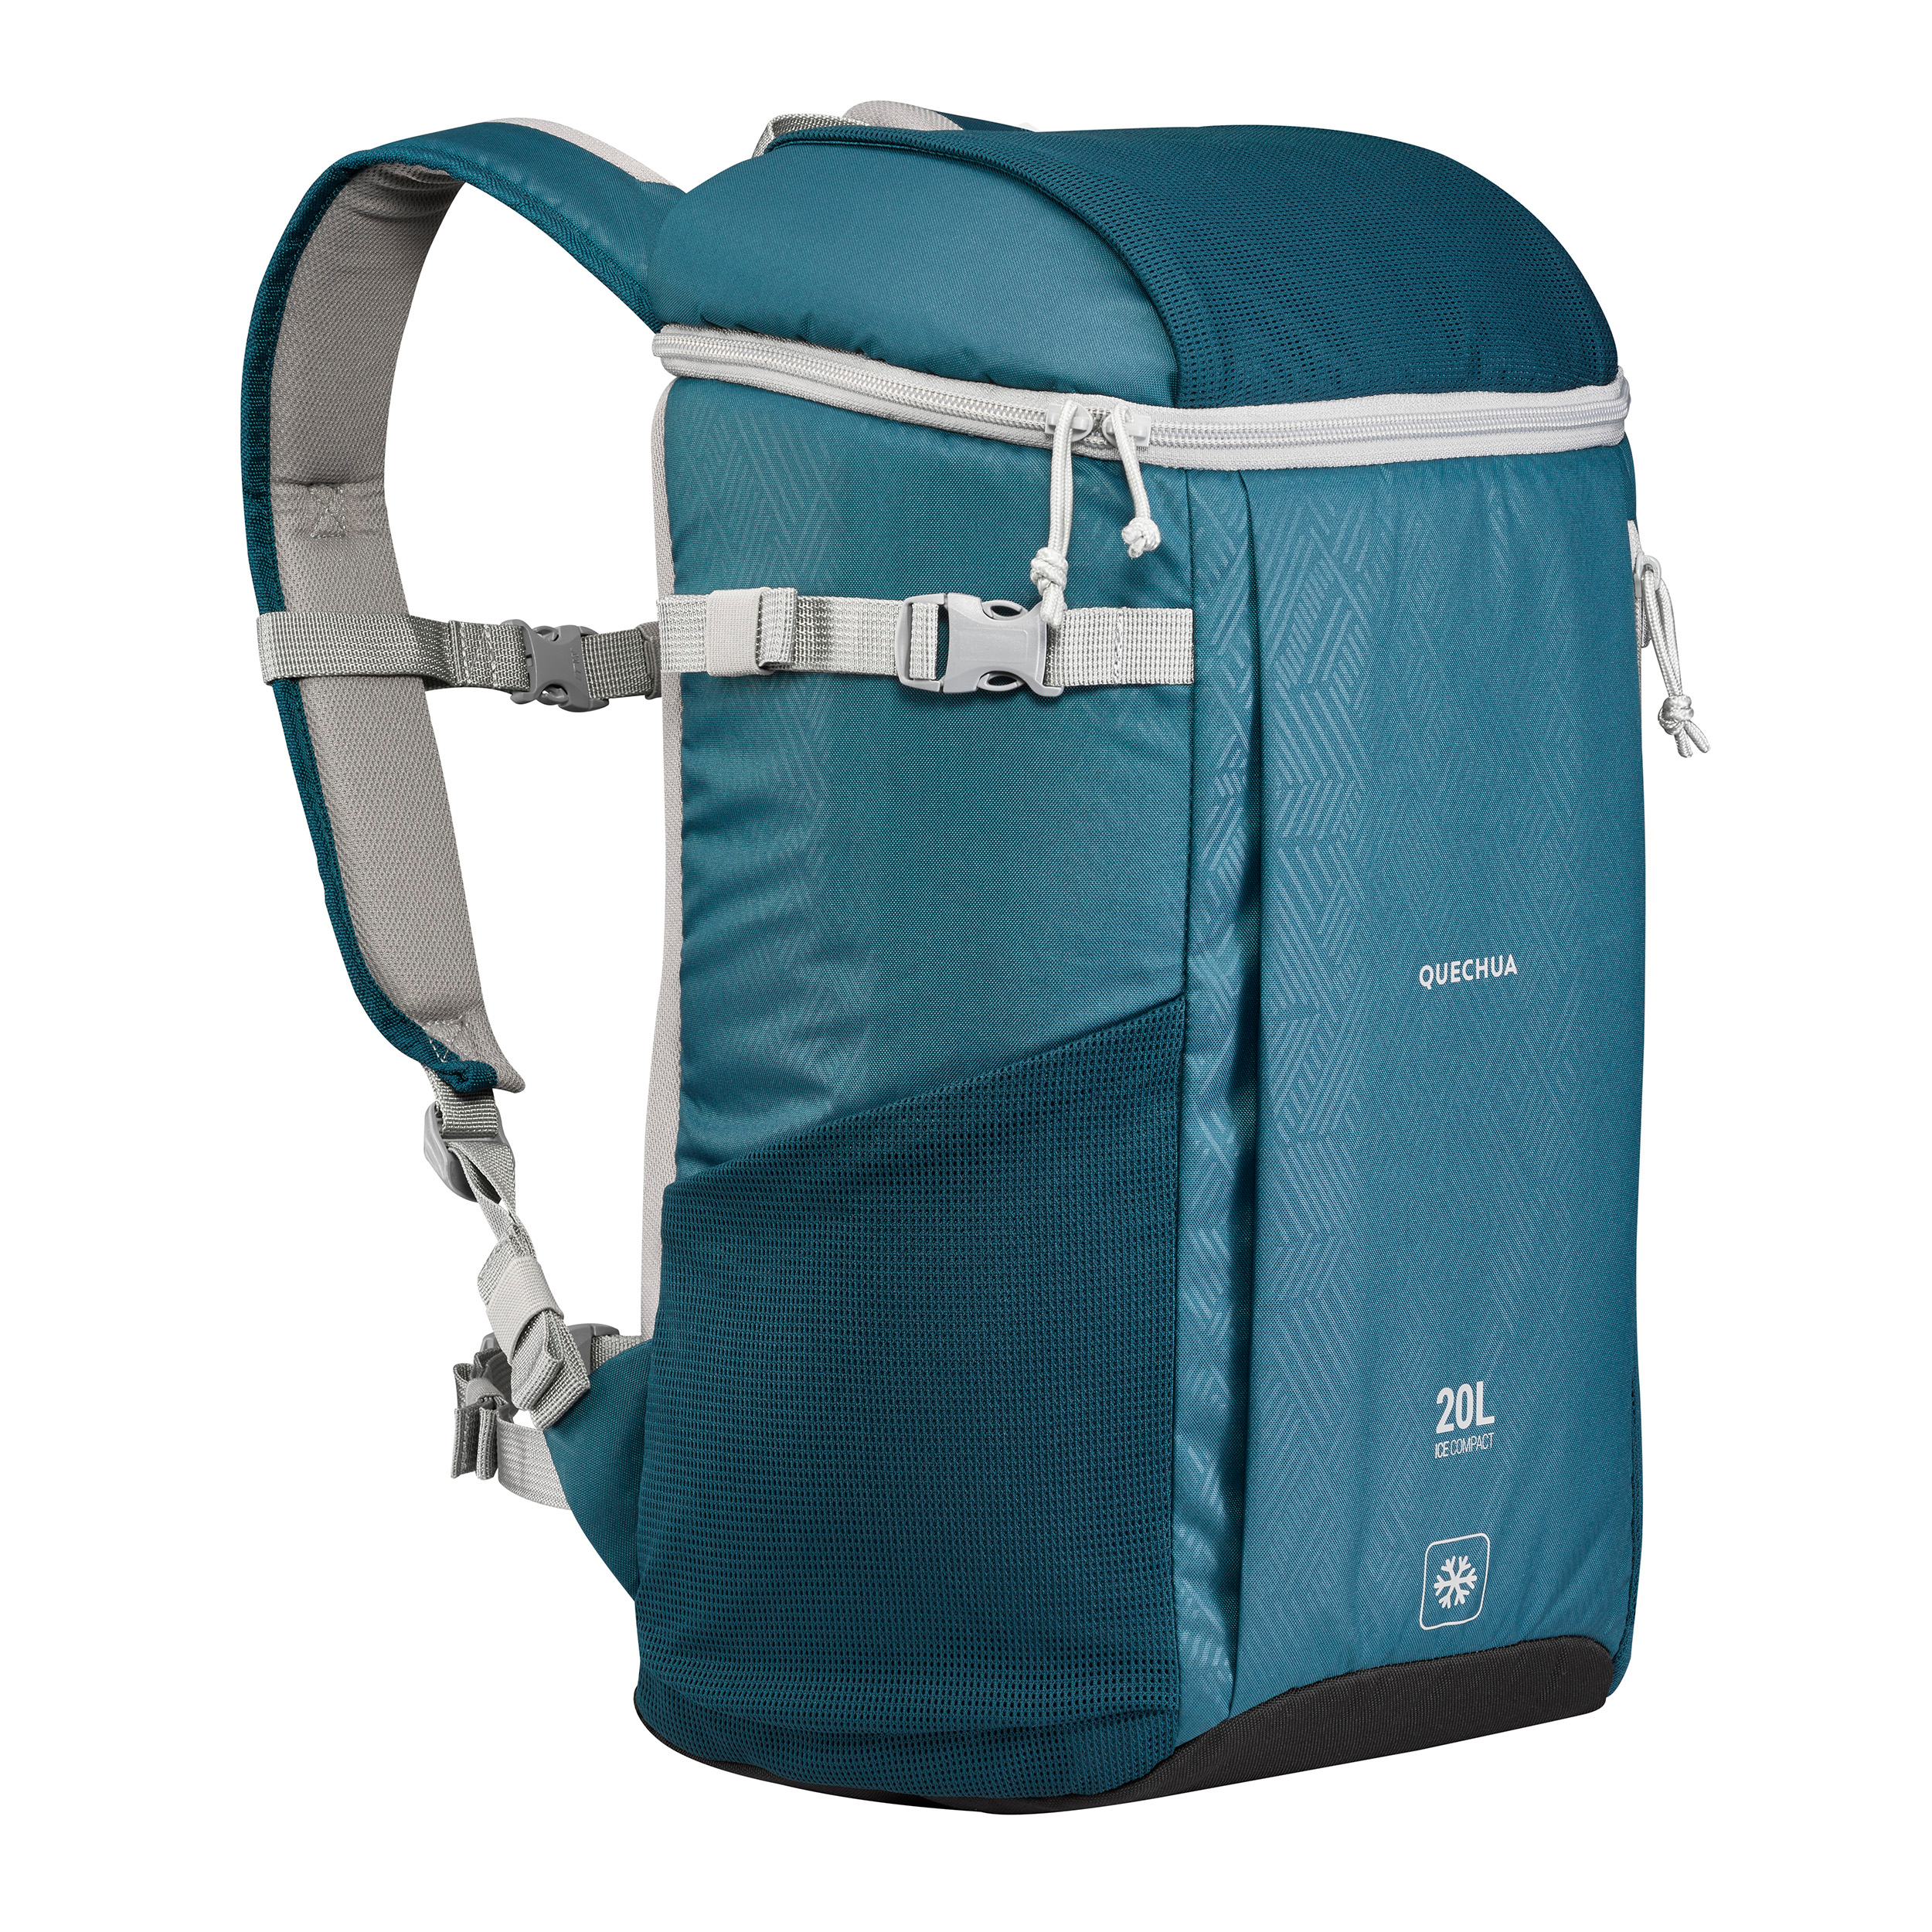 SAC ISOTHERME 20L AVEC POCHES